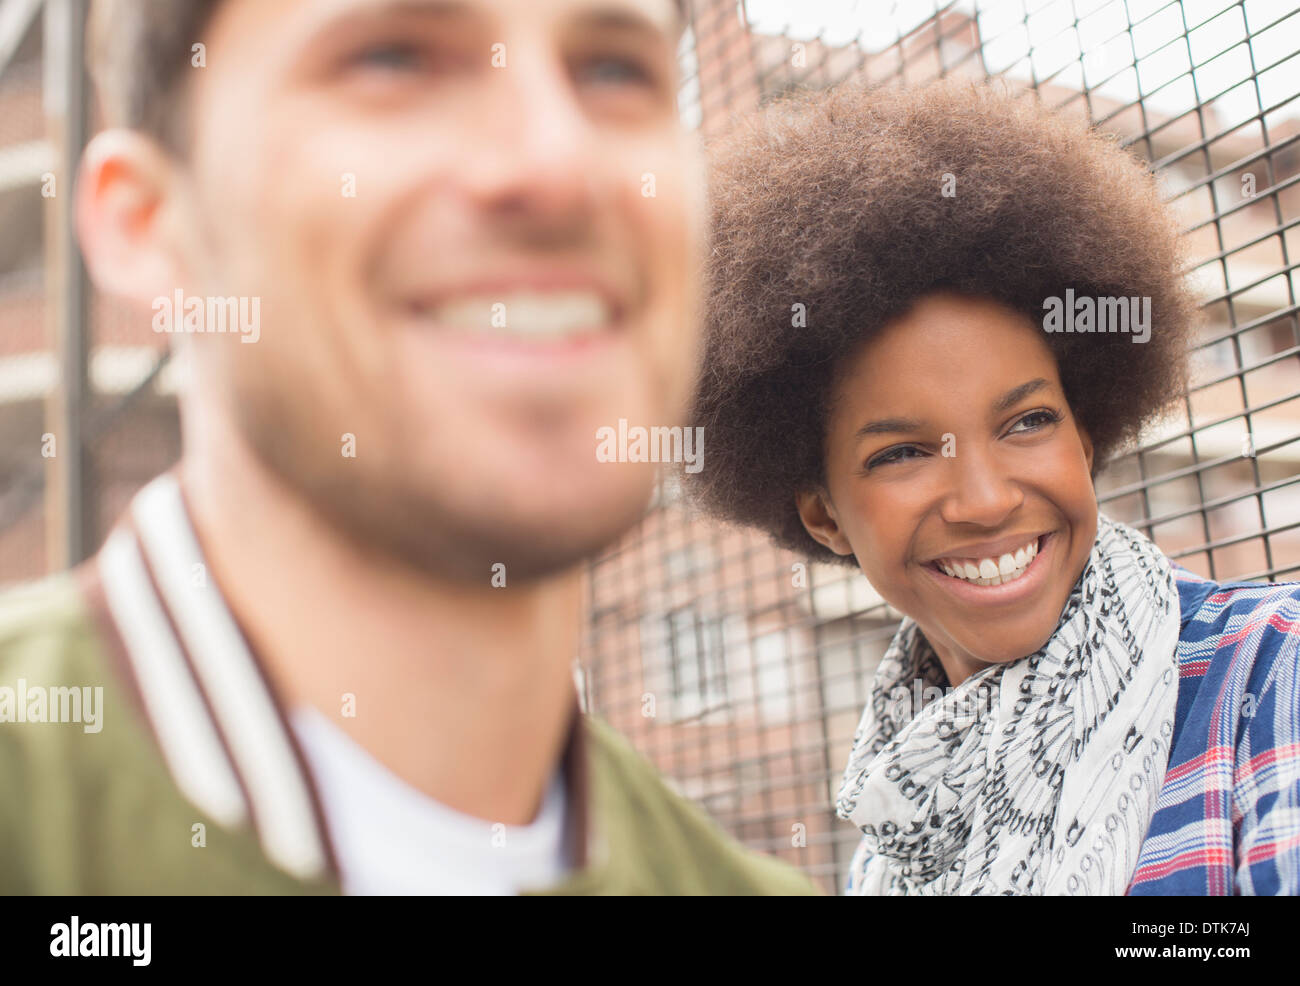 Man and woman smiling near fence Stock Photo